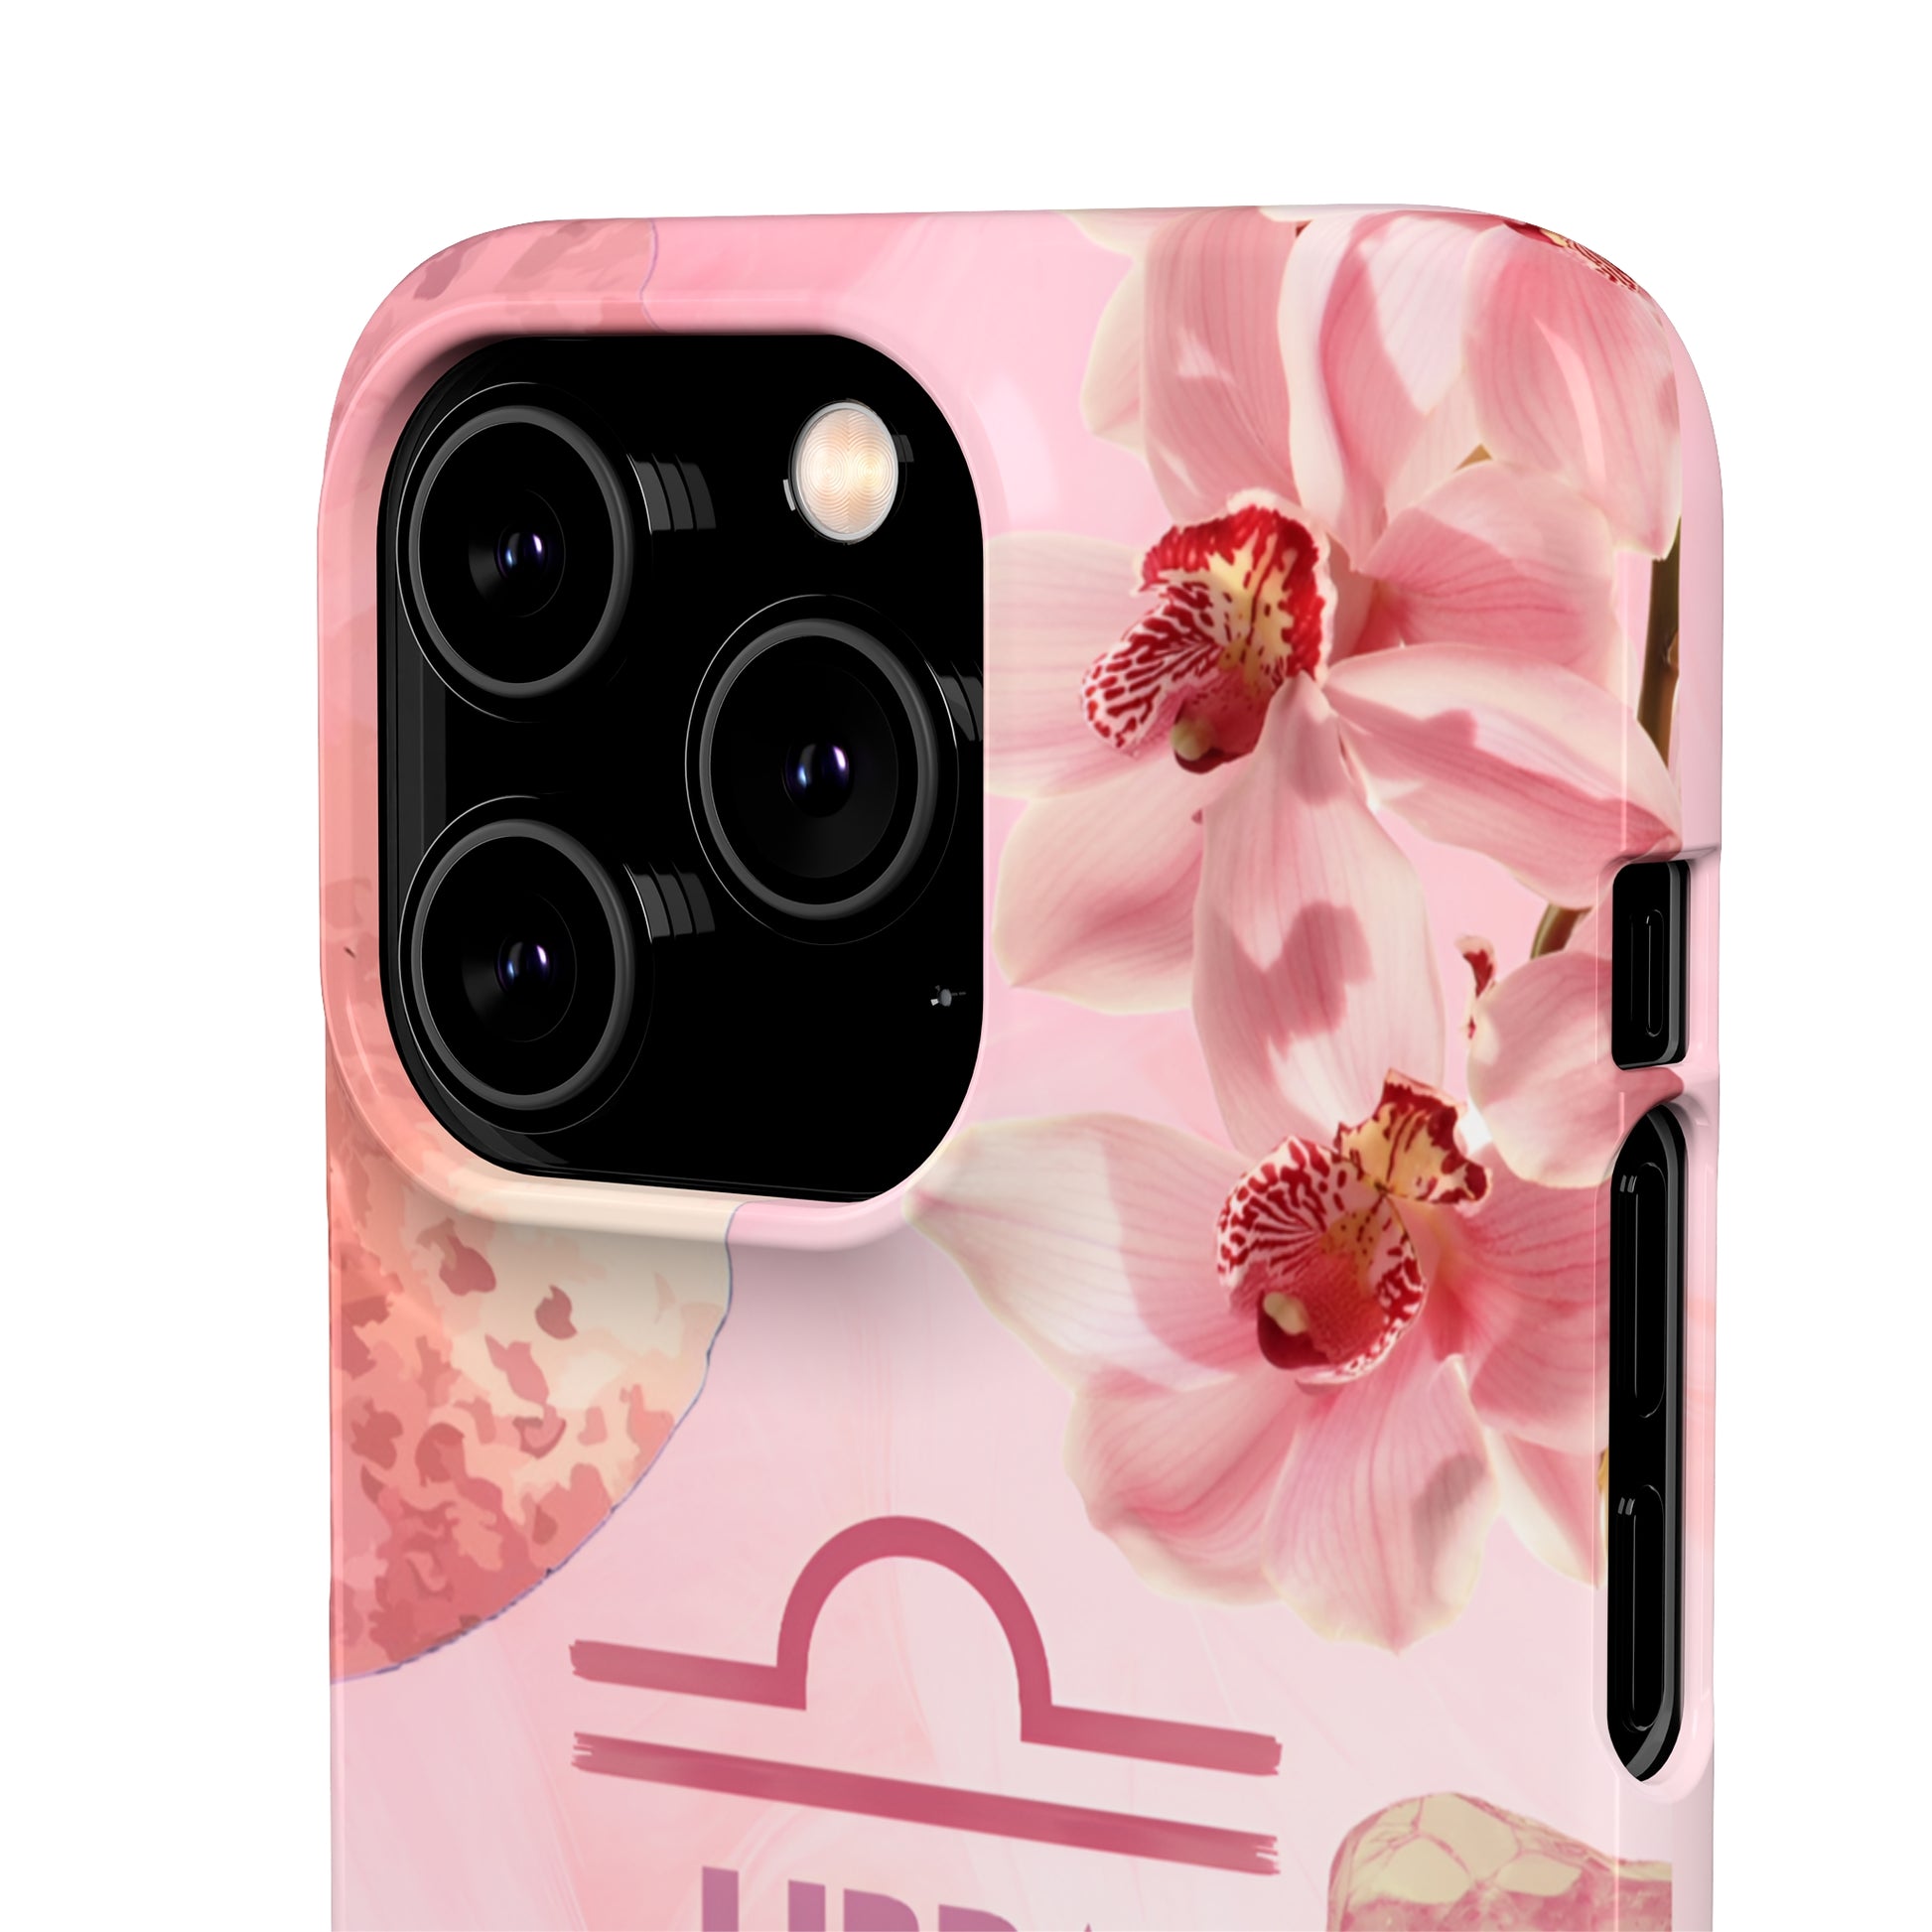 LIBRA Apple iPhone 11 Pro Phone Cases ASTRA-LOGY